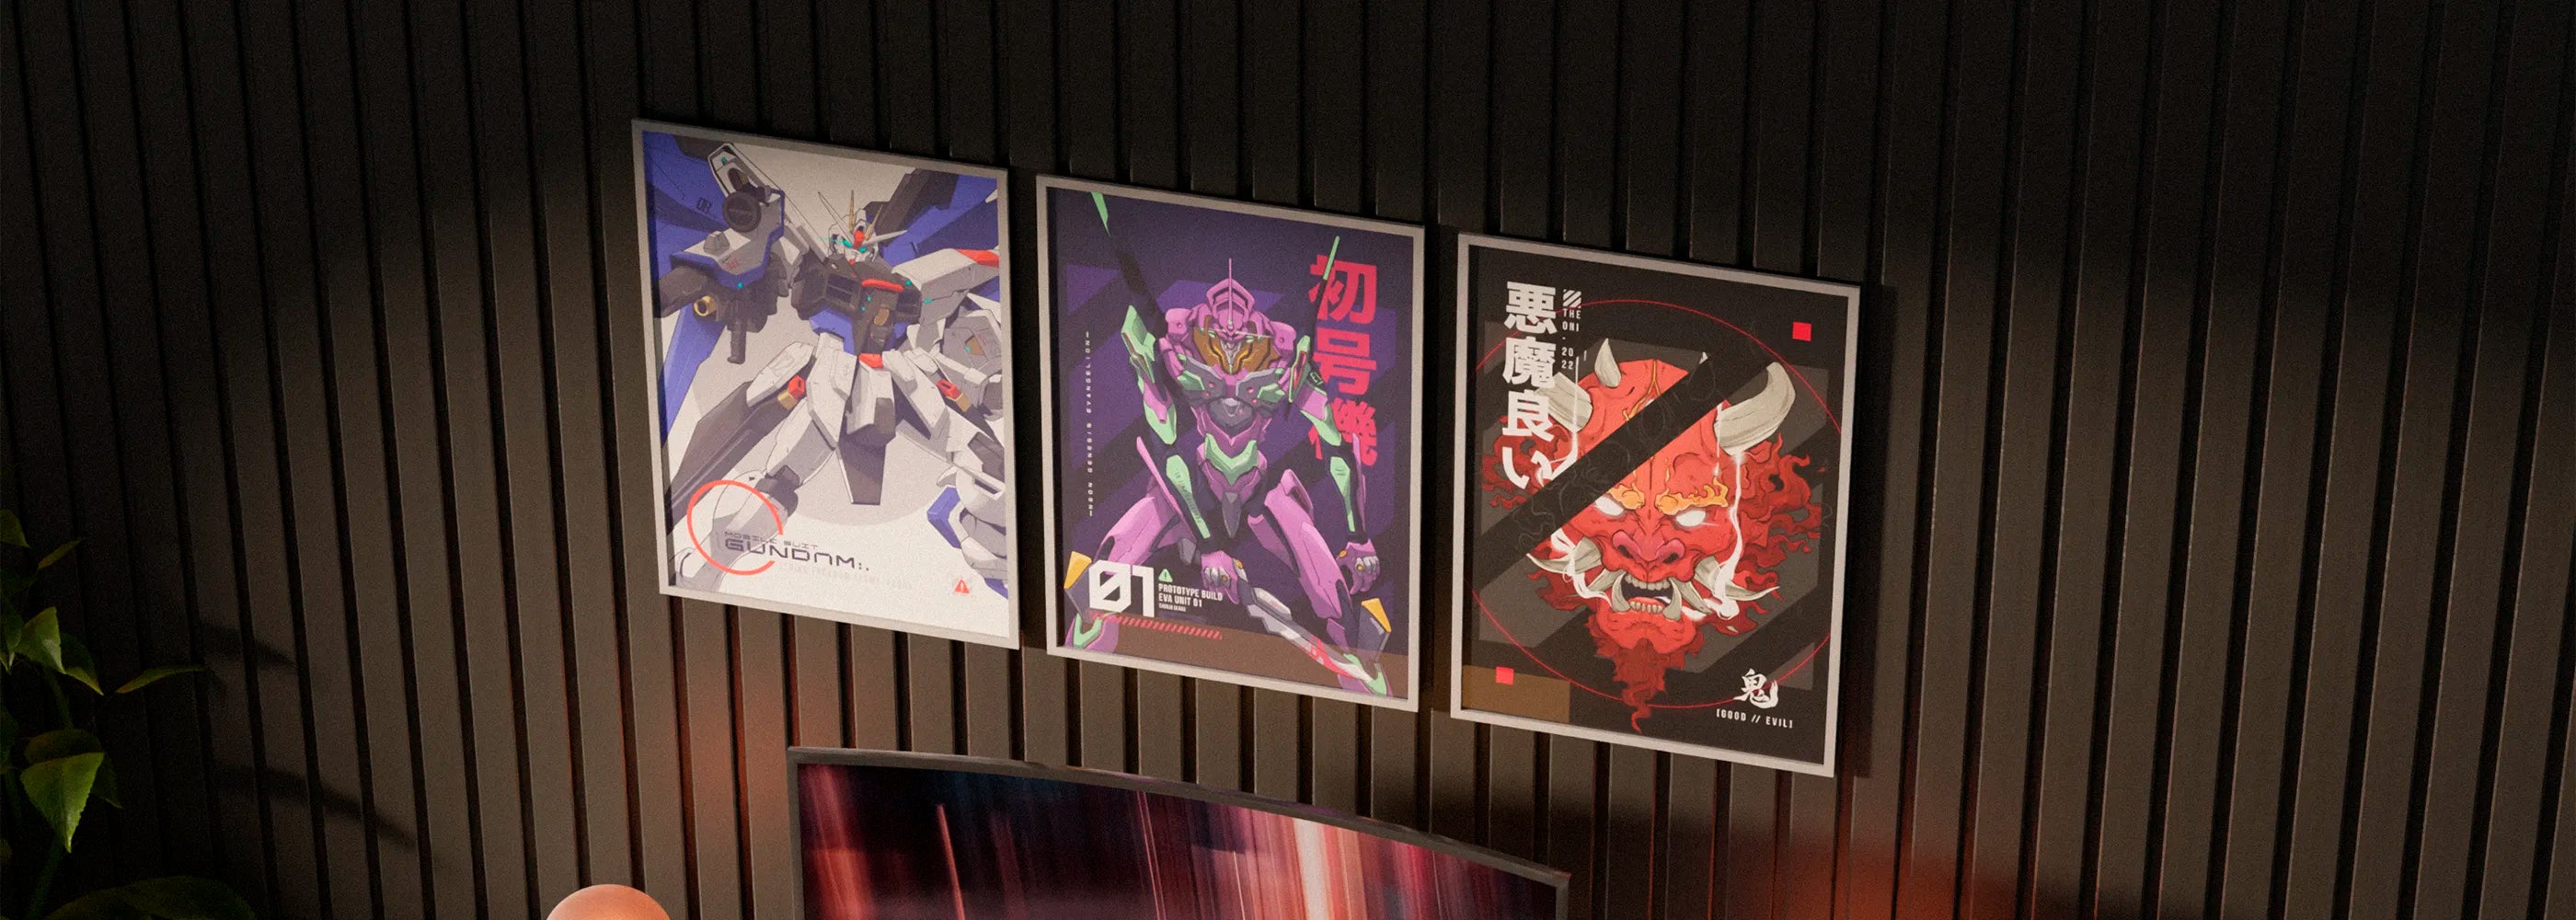 PigModding Framed Gaming Anime Gaming Posters displayed on a wall.